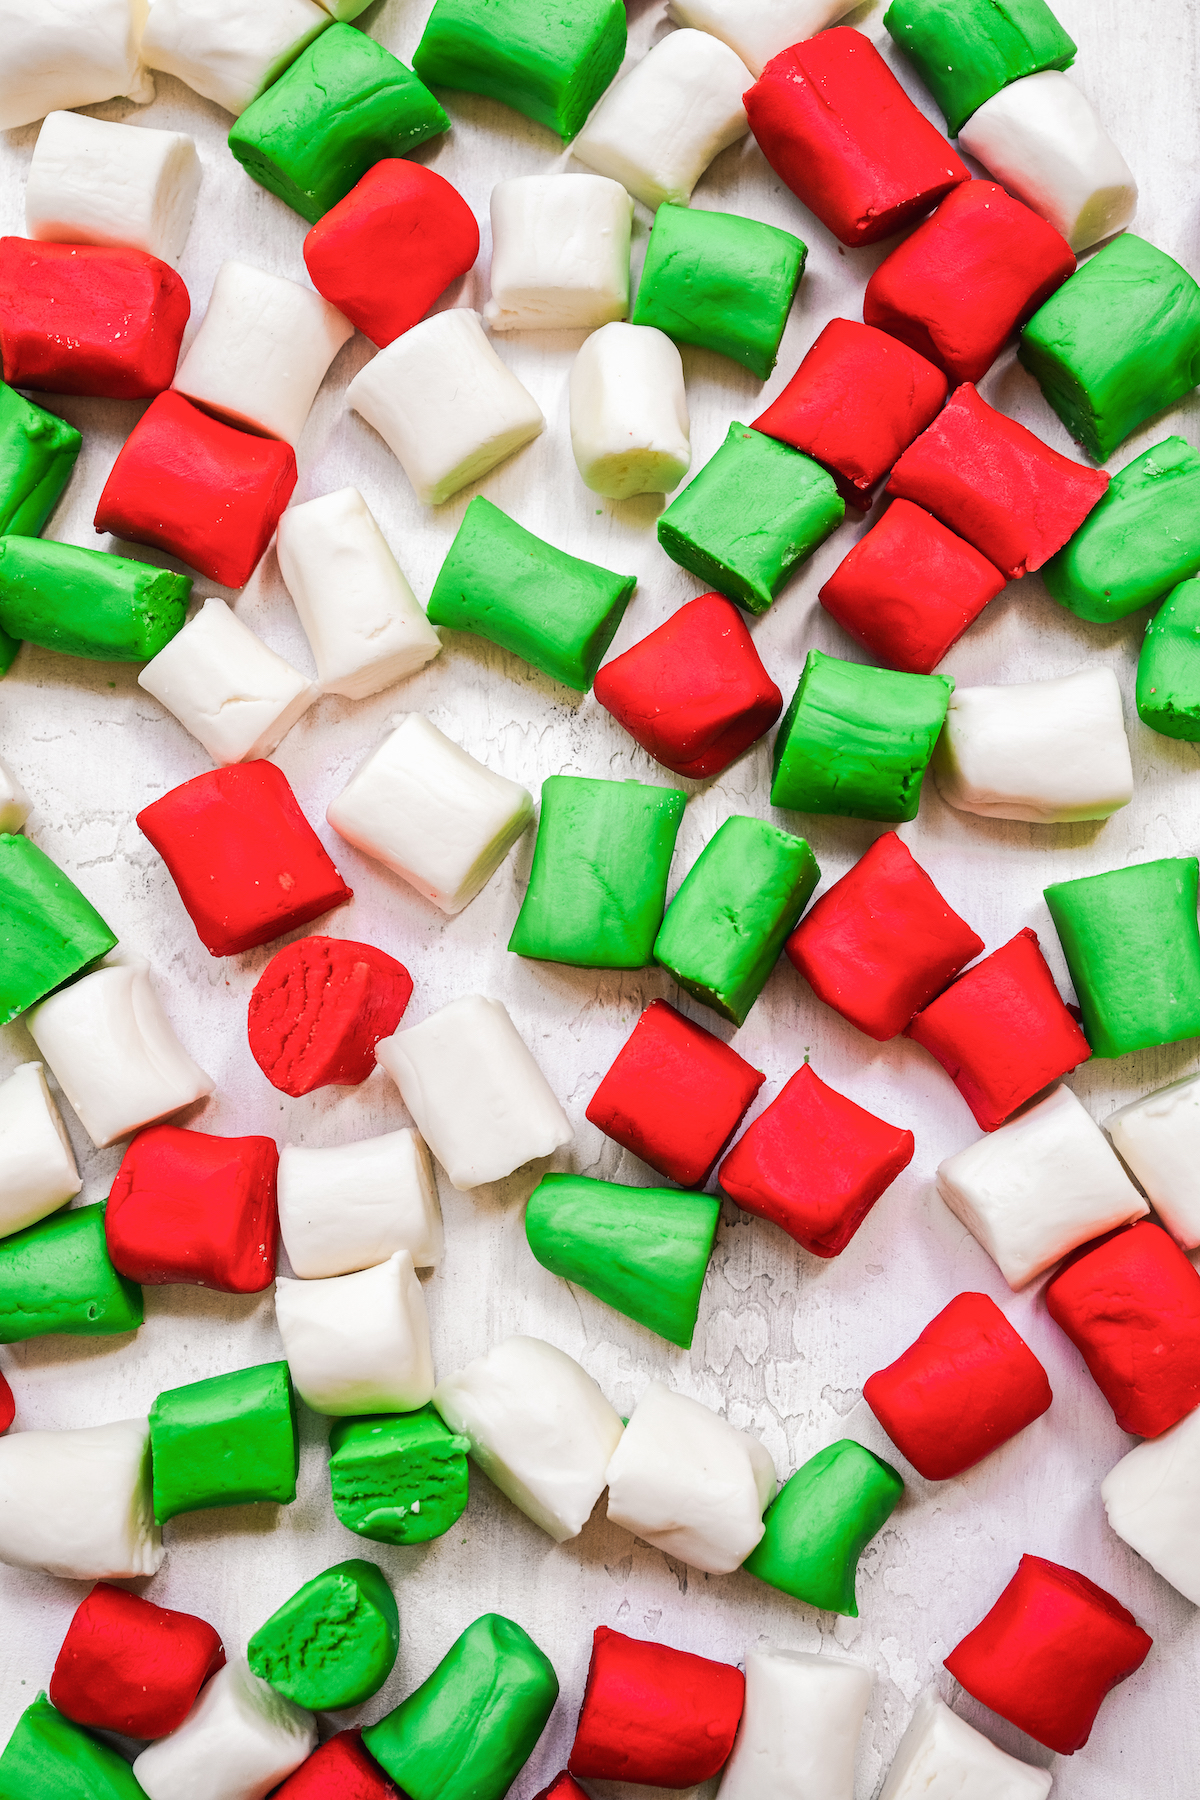 Christmas mints colored red, green, and white.